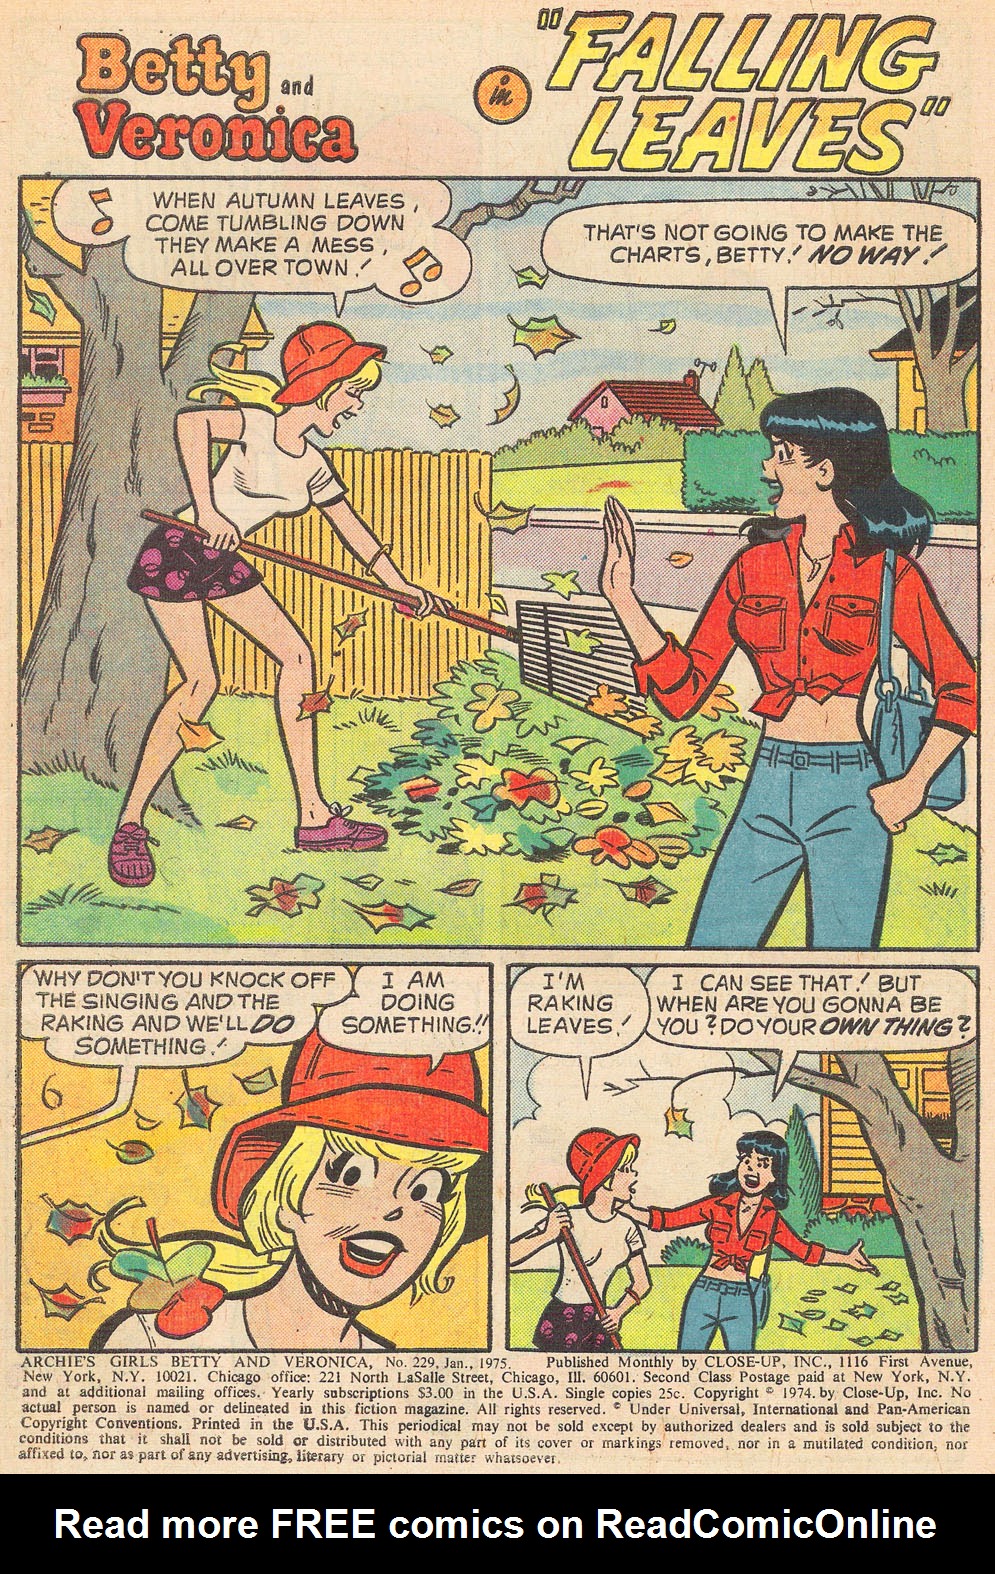 Read online Archie's Girls Betty and Veronica comic -  Issue #229 - 3